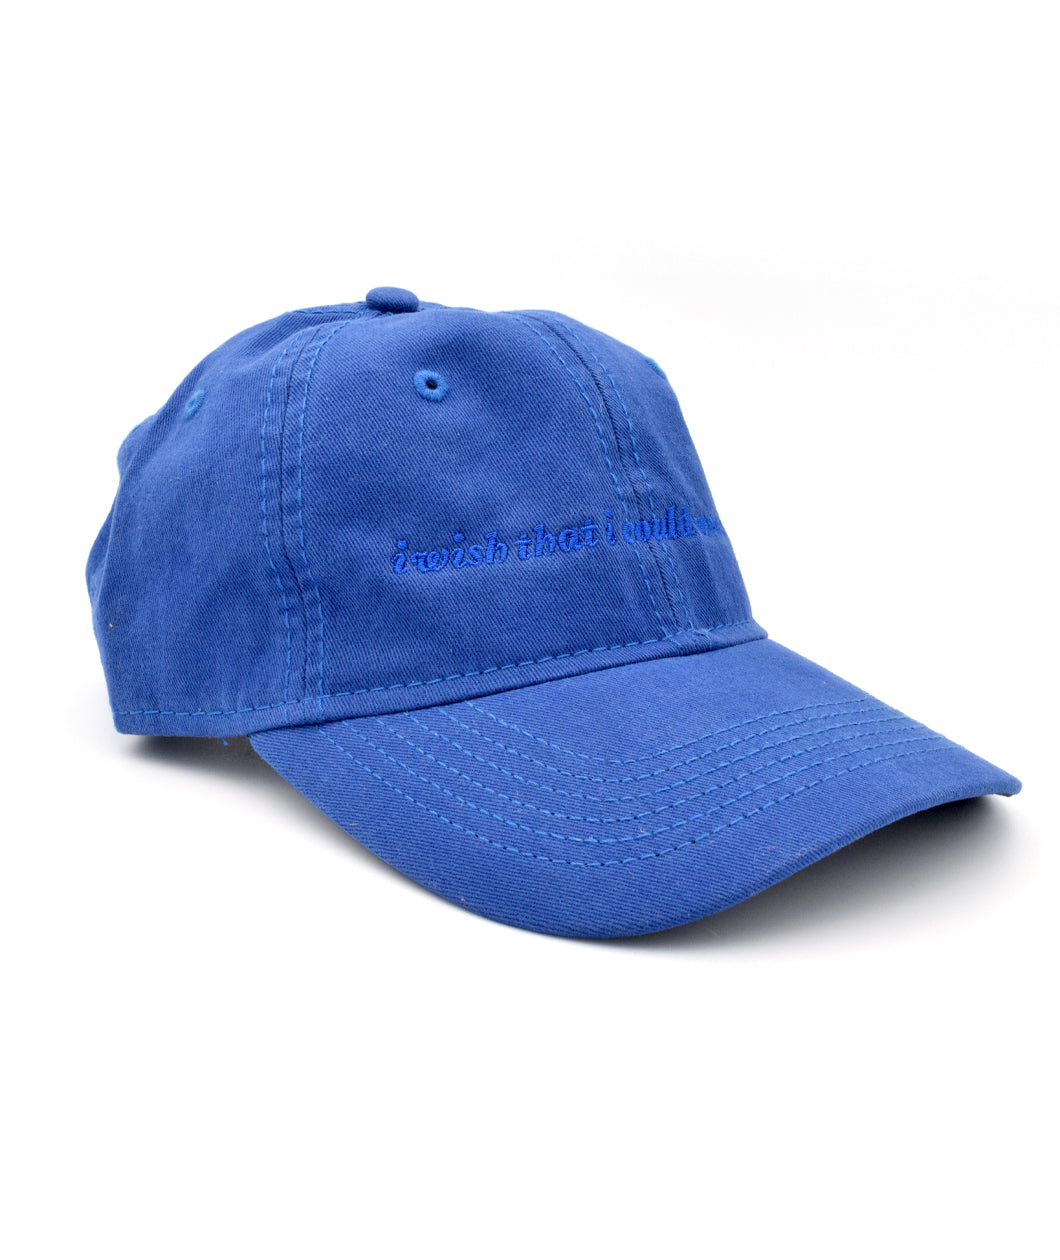 Side view of a blue ball cap with lowercase embroidered words saying "i wish that i could wear hats". From Brian David Gilbert. 